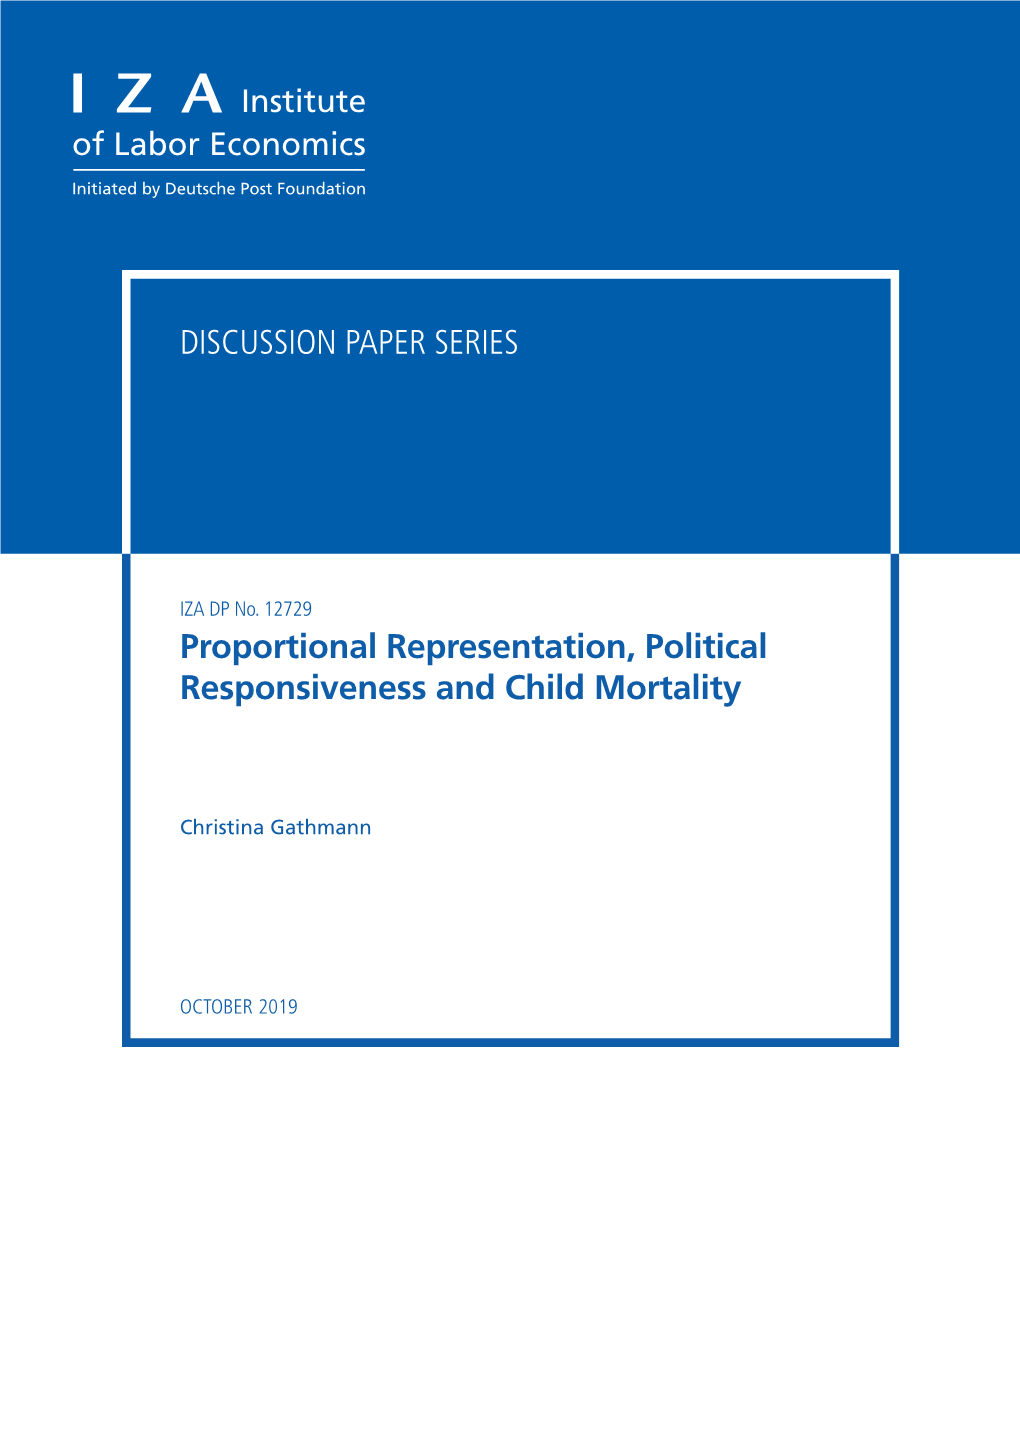 Proportional Representation, Political Responsiveness and Child Mortality